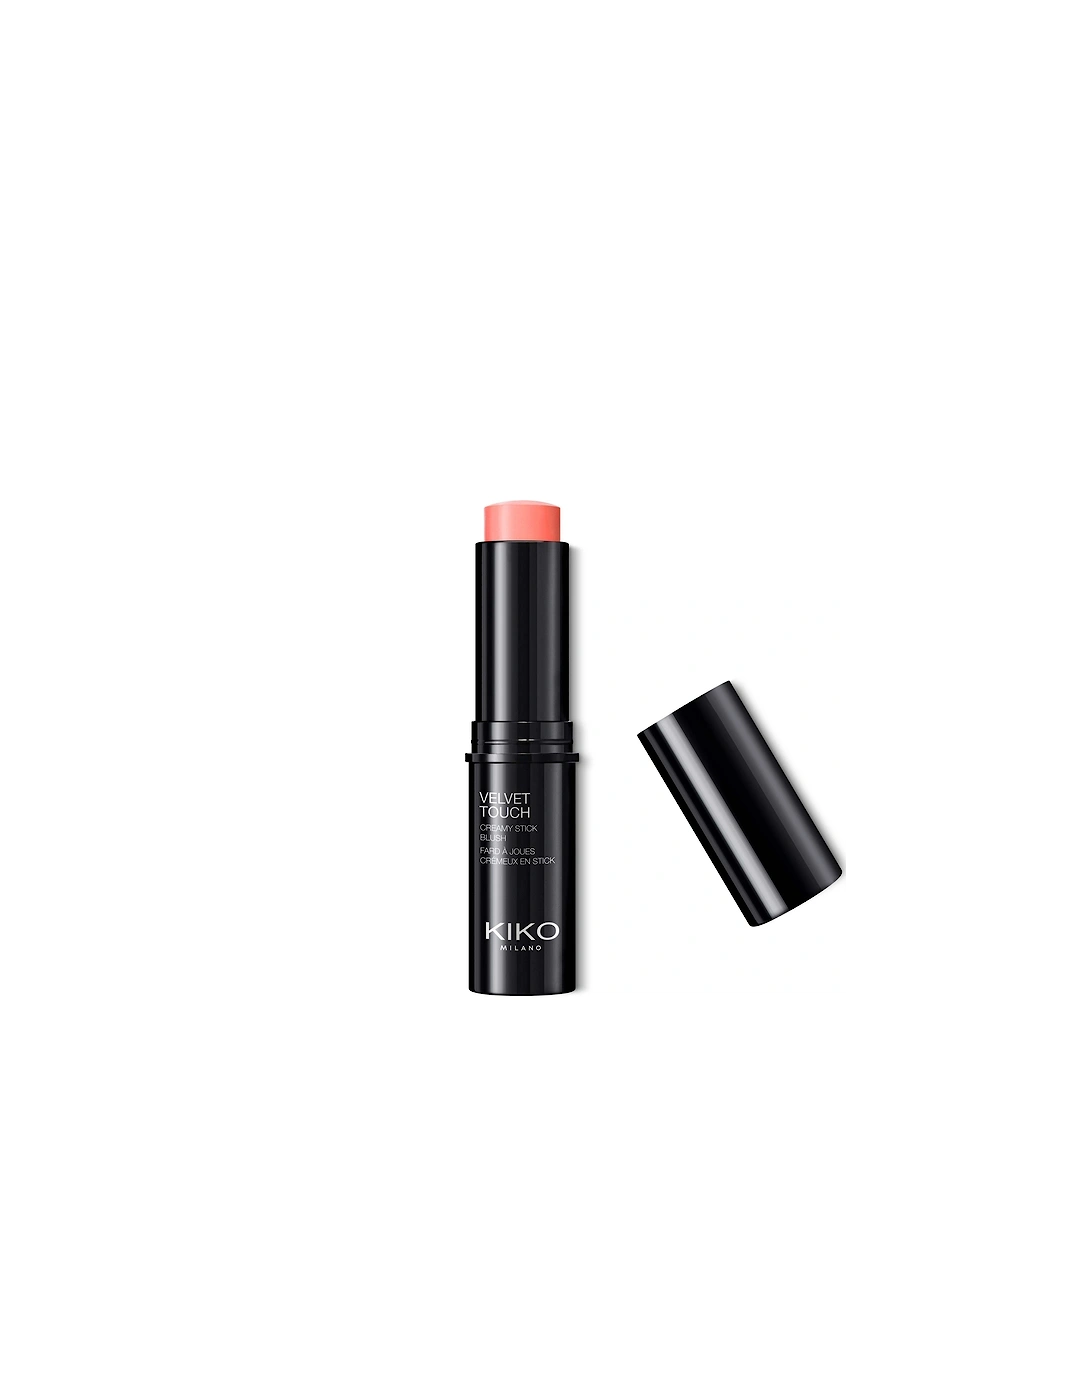 Velvet Touch Creamy Stick Blush - 03 Coral Rose, 2 of 1